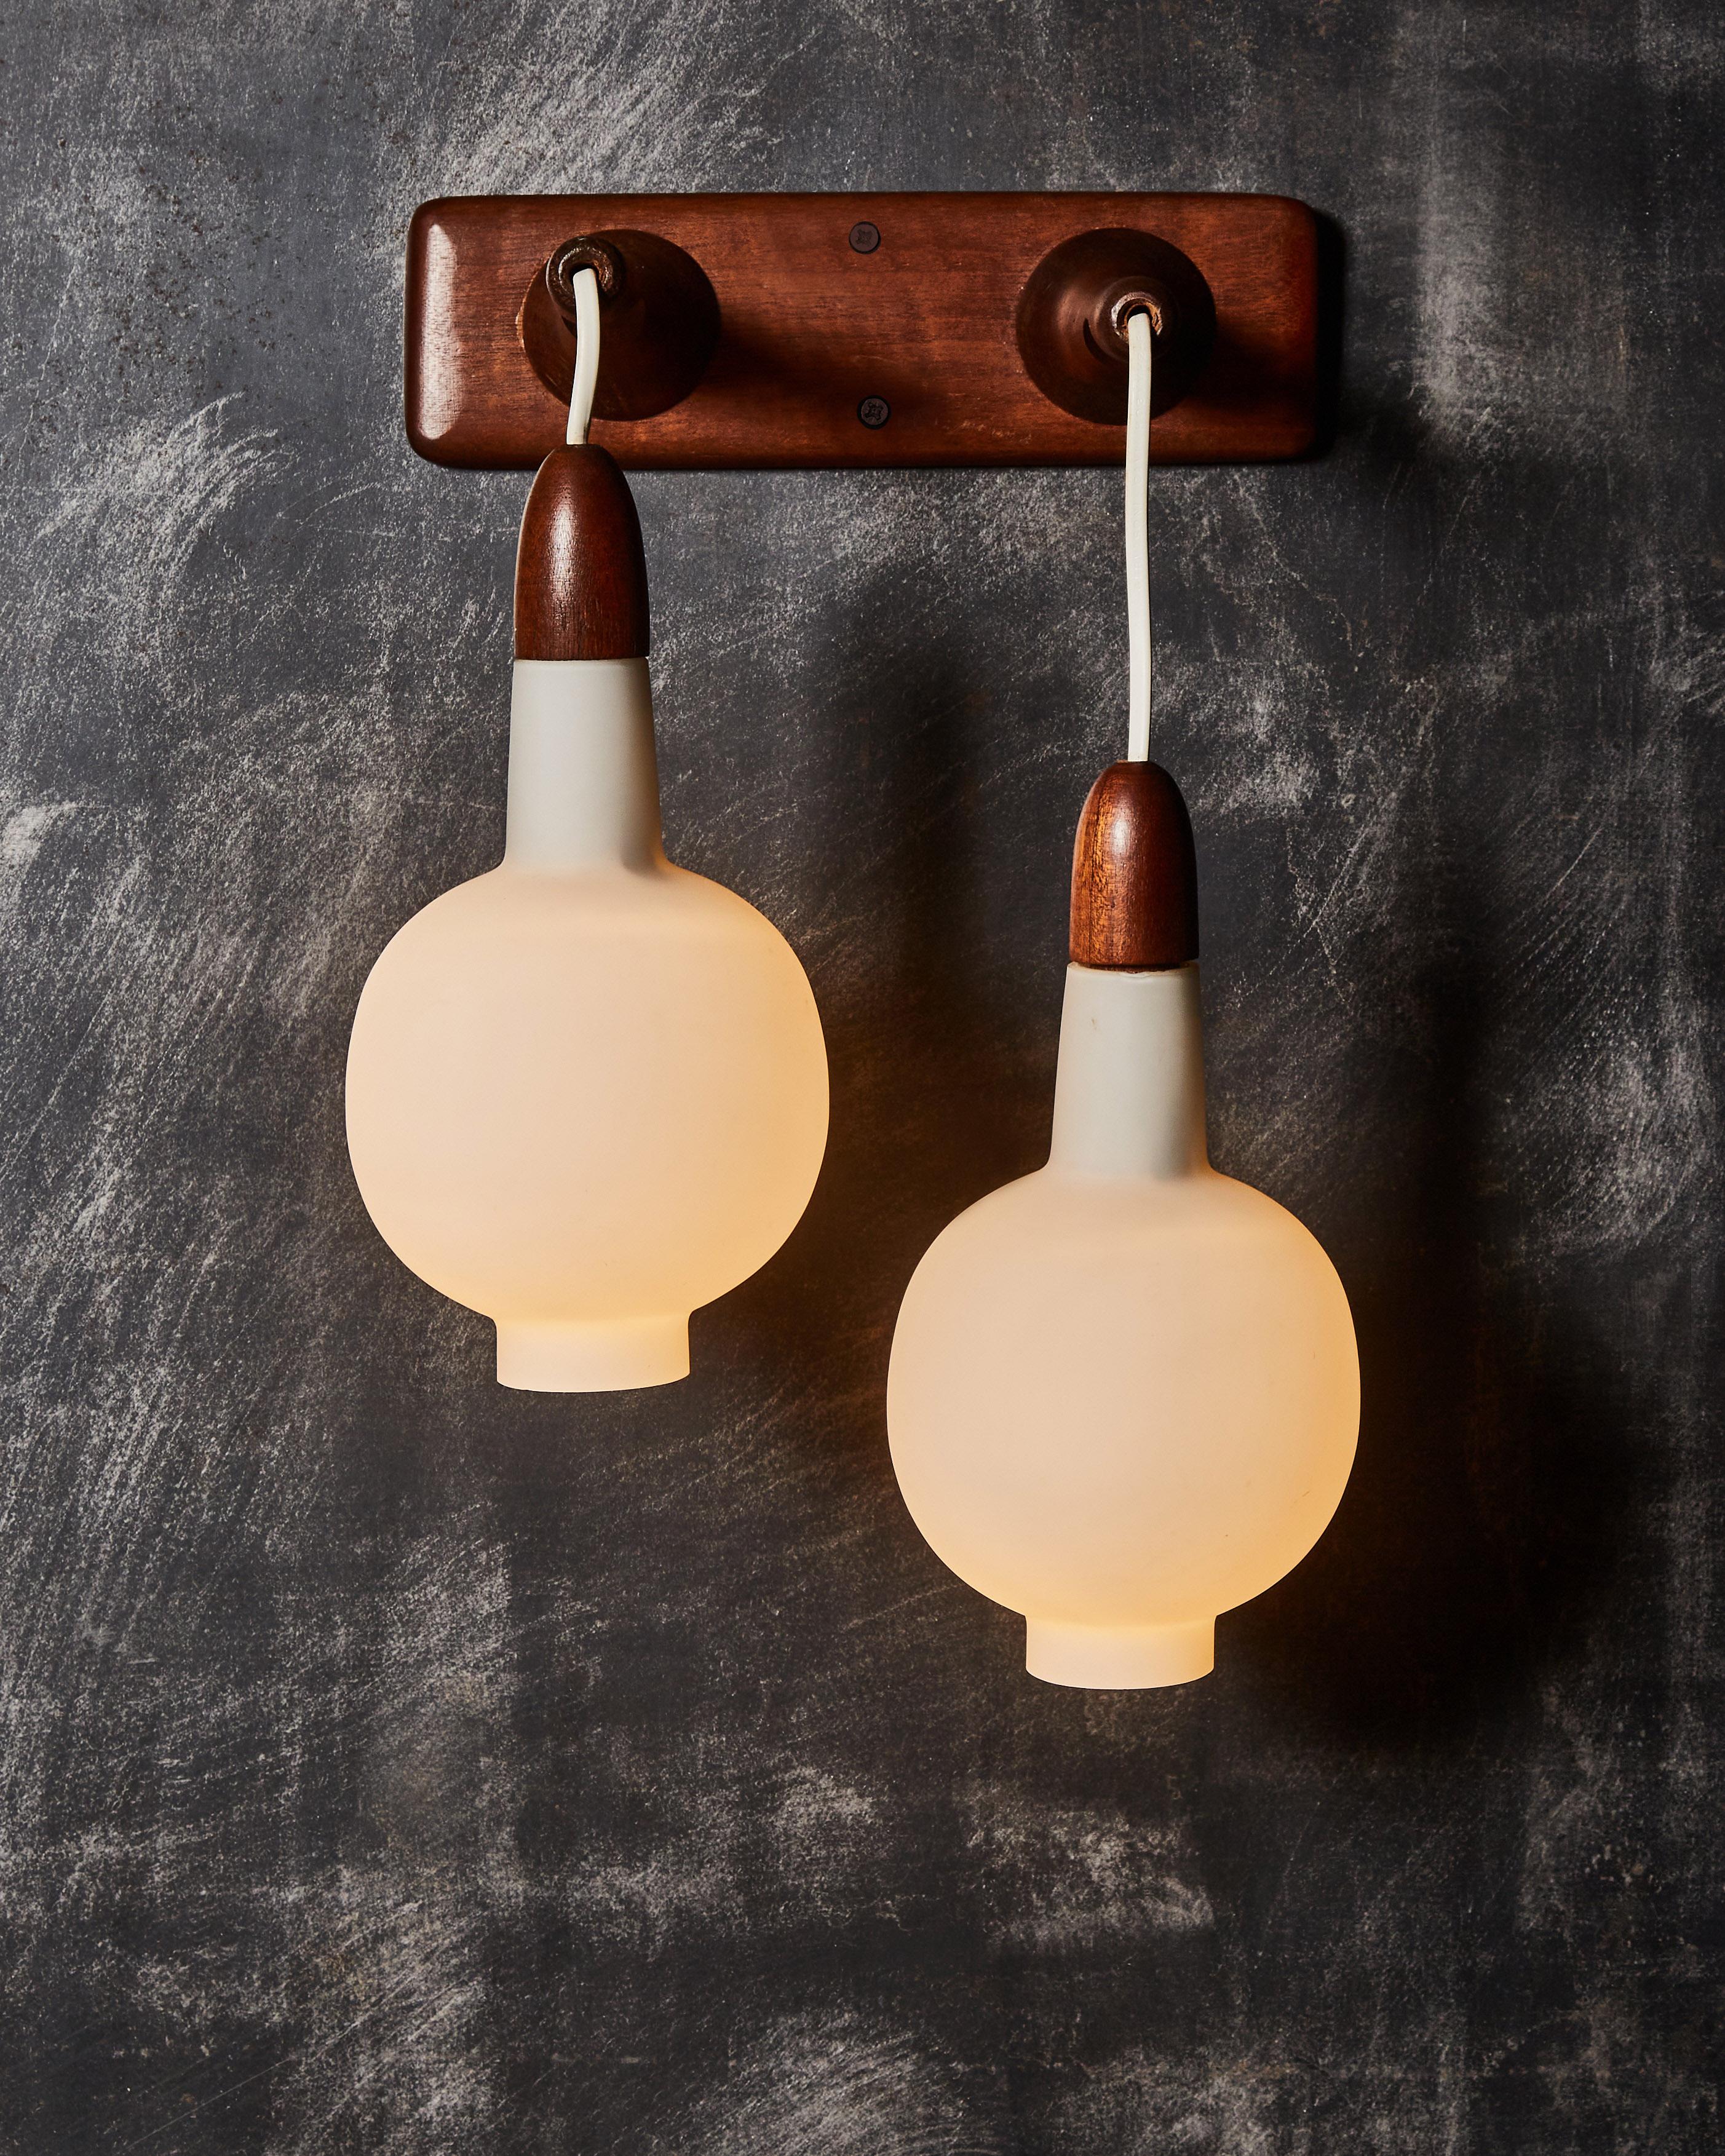 Pair of mid-century wall sconces made of a dark wood backplate and arms and two opaline glass lanterns.